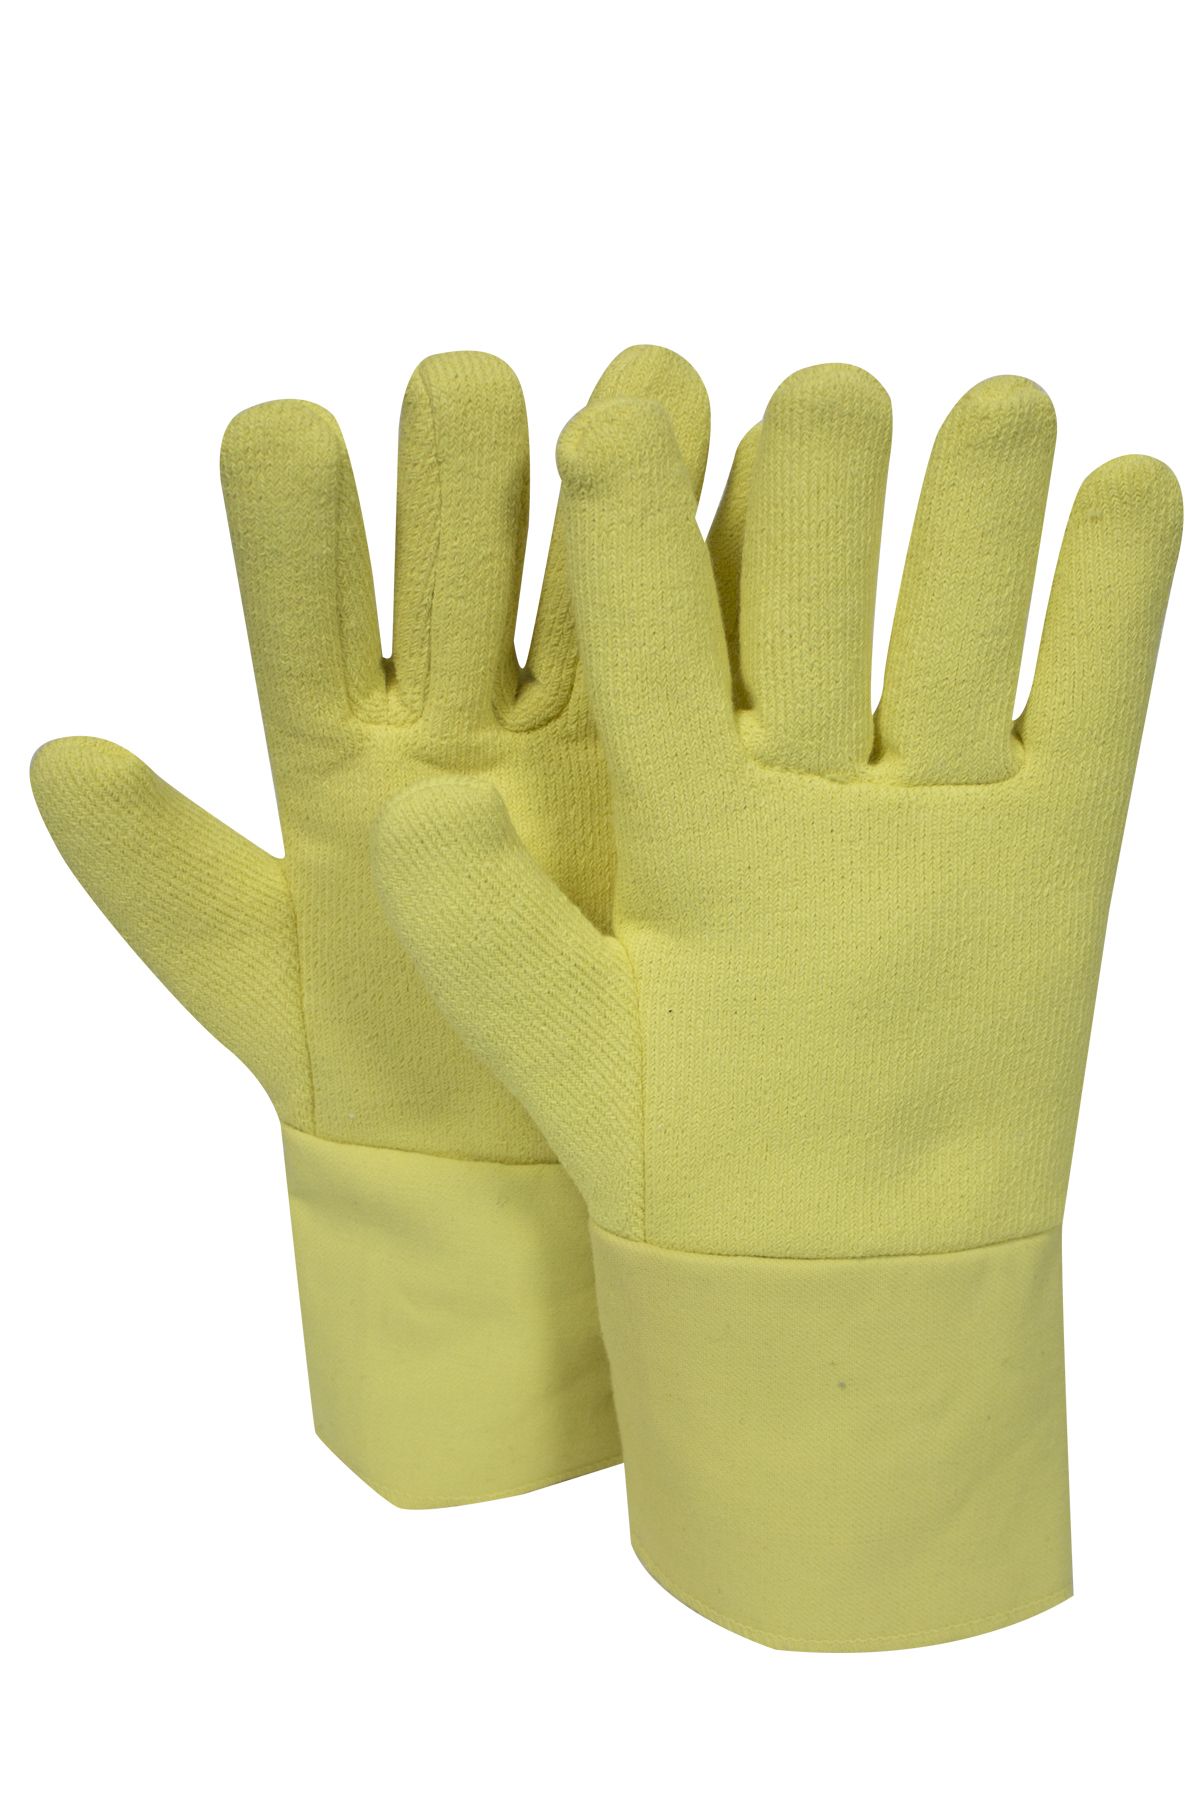 National Safety Apparel Reversed Terry Cloth Glove, 12"